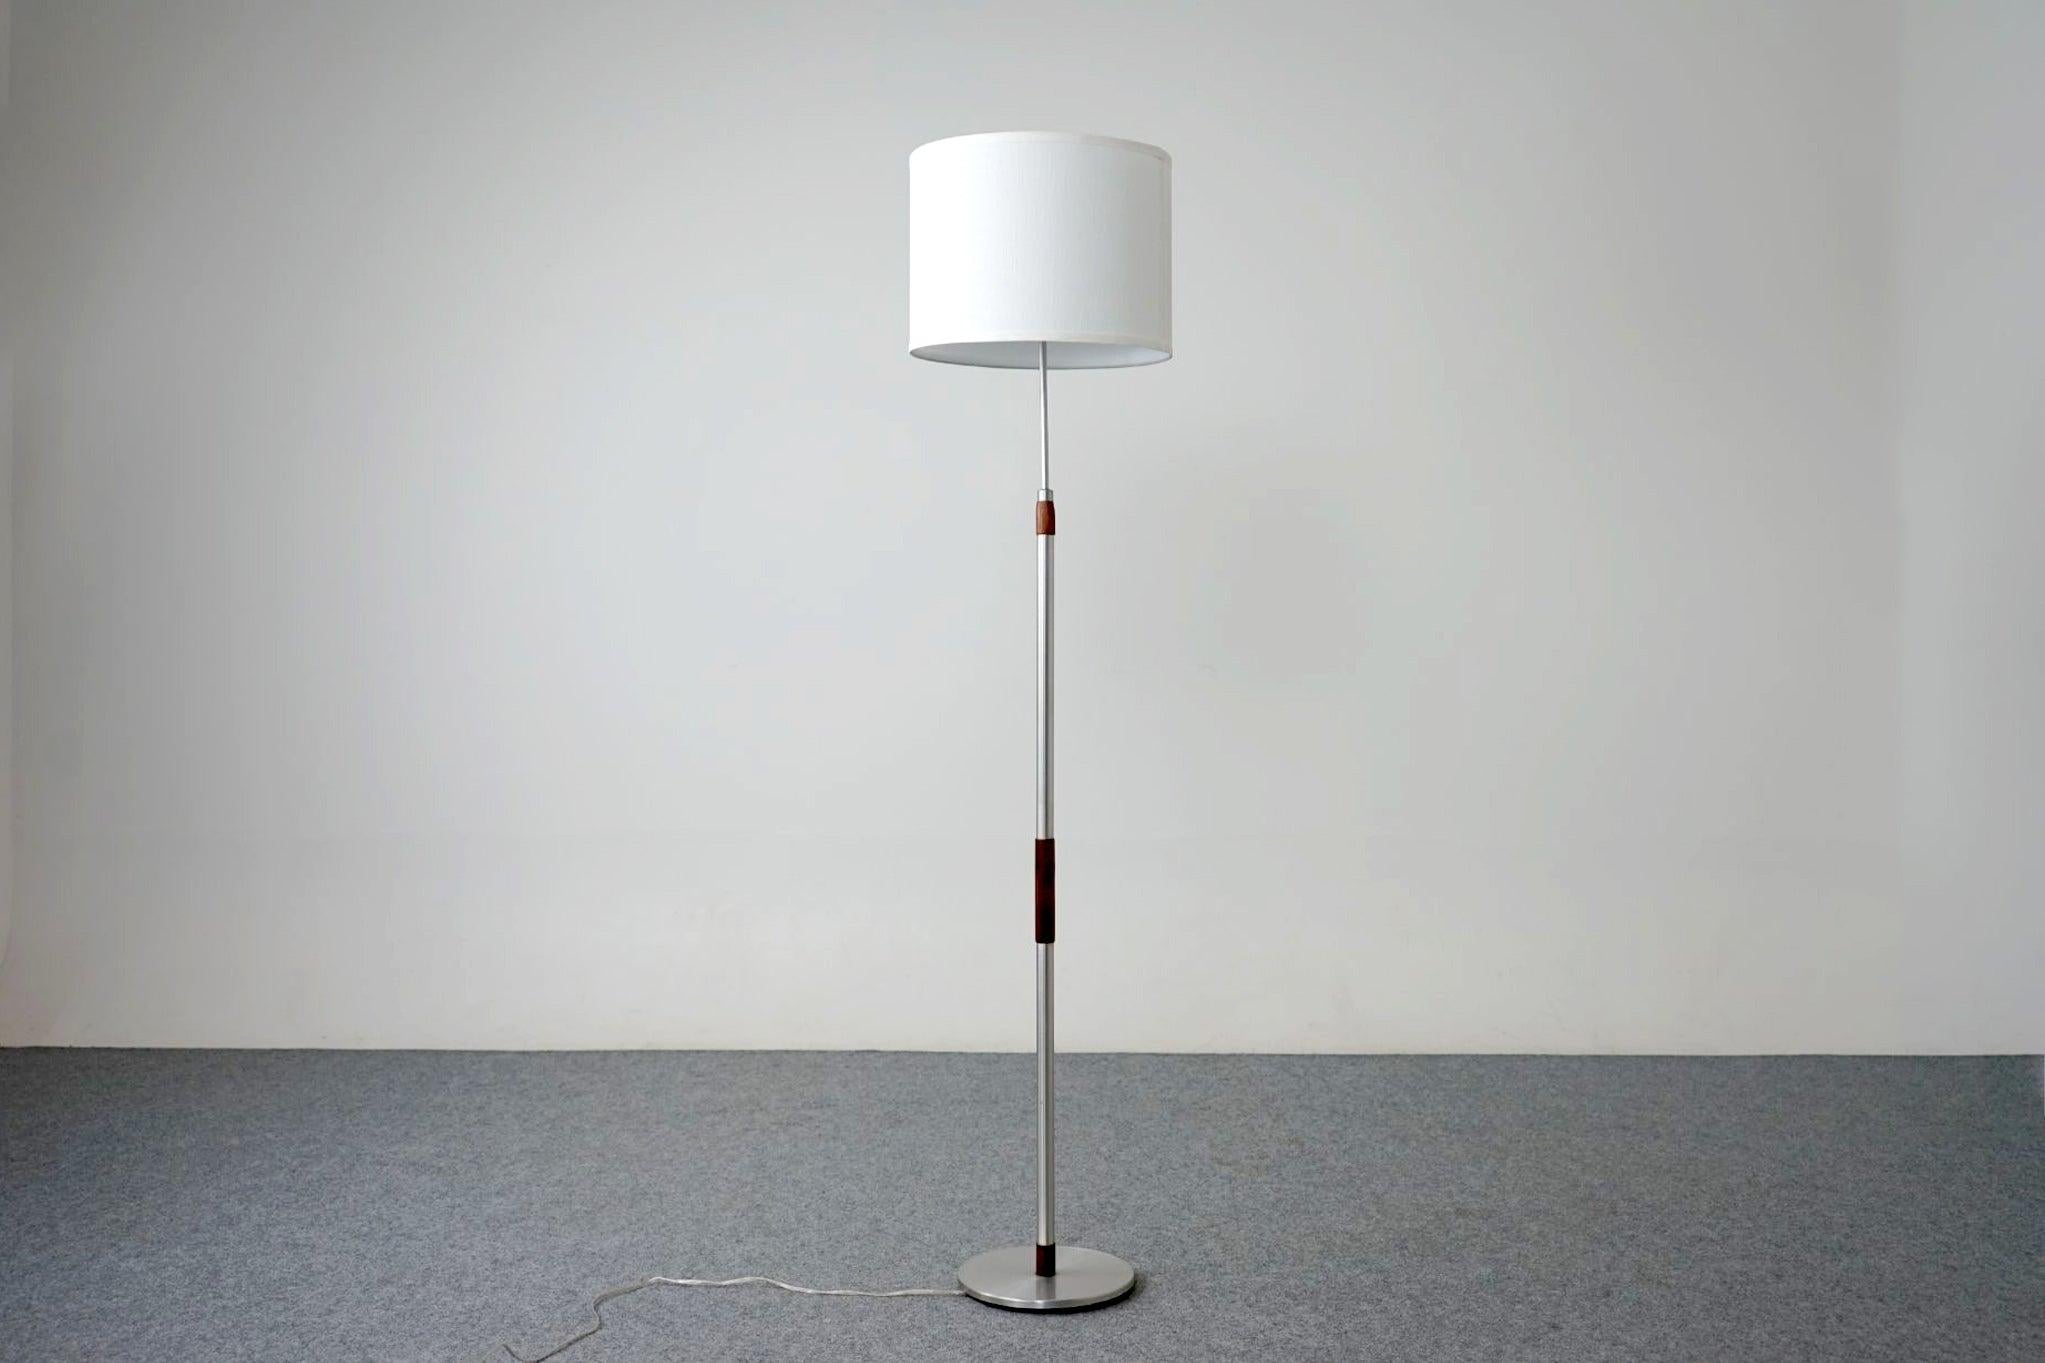 Rosewood and aluminum floor lamp, circa 1960's. This sleek contemporary beauty has a tri-light socket, allowing for 3 brightness levels to suit different lighting requirements. Updated electrical and a crisp, fresh custom shade in high quality